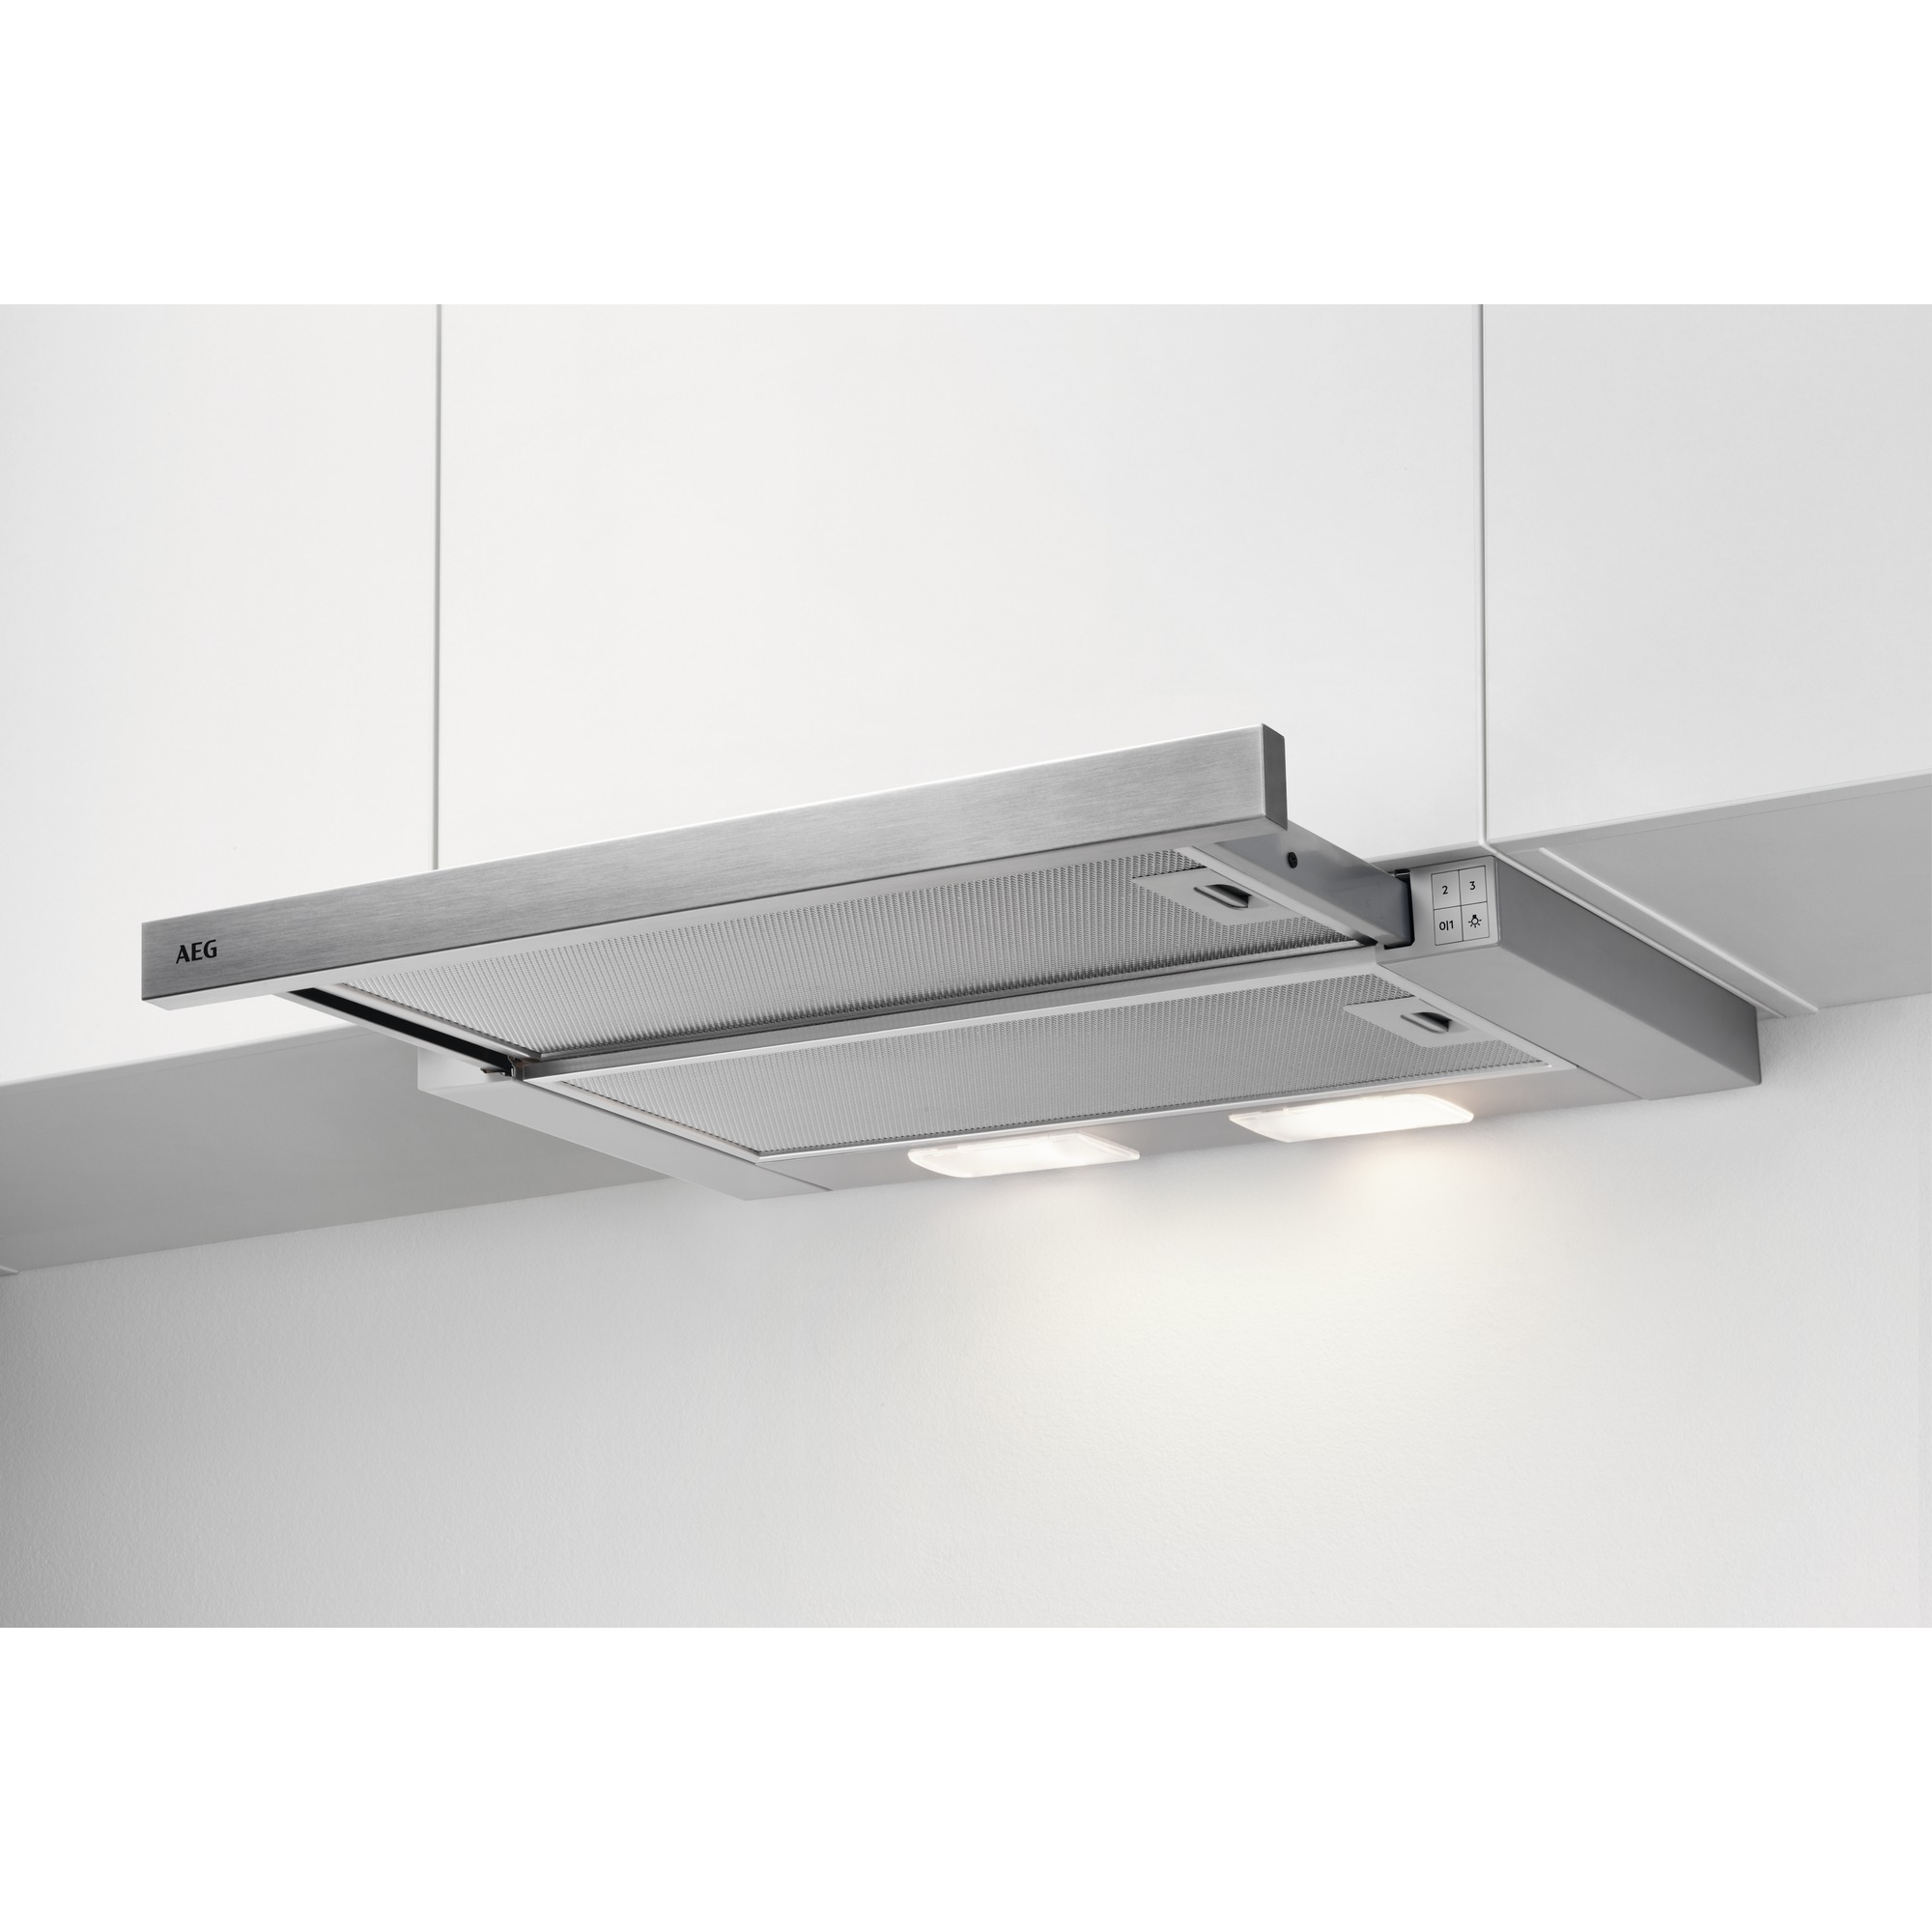 AEG 600mm Pull-Out Cooker Hood 3-Speed S/Steel